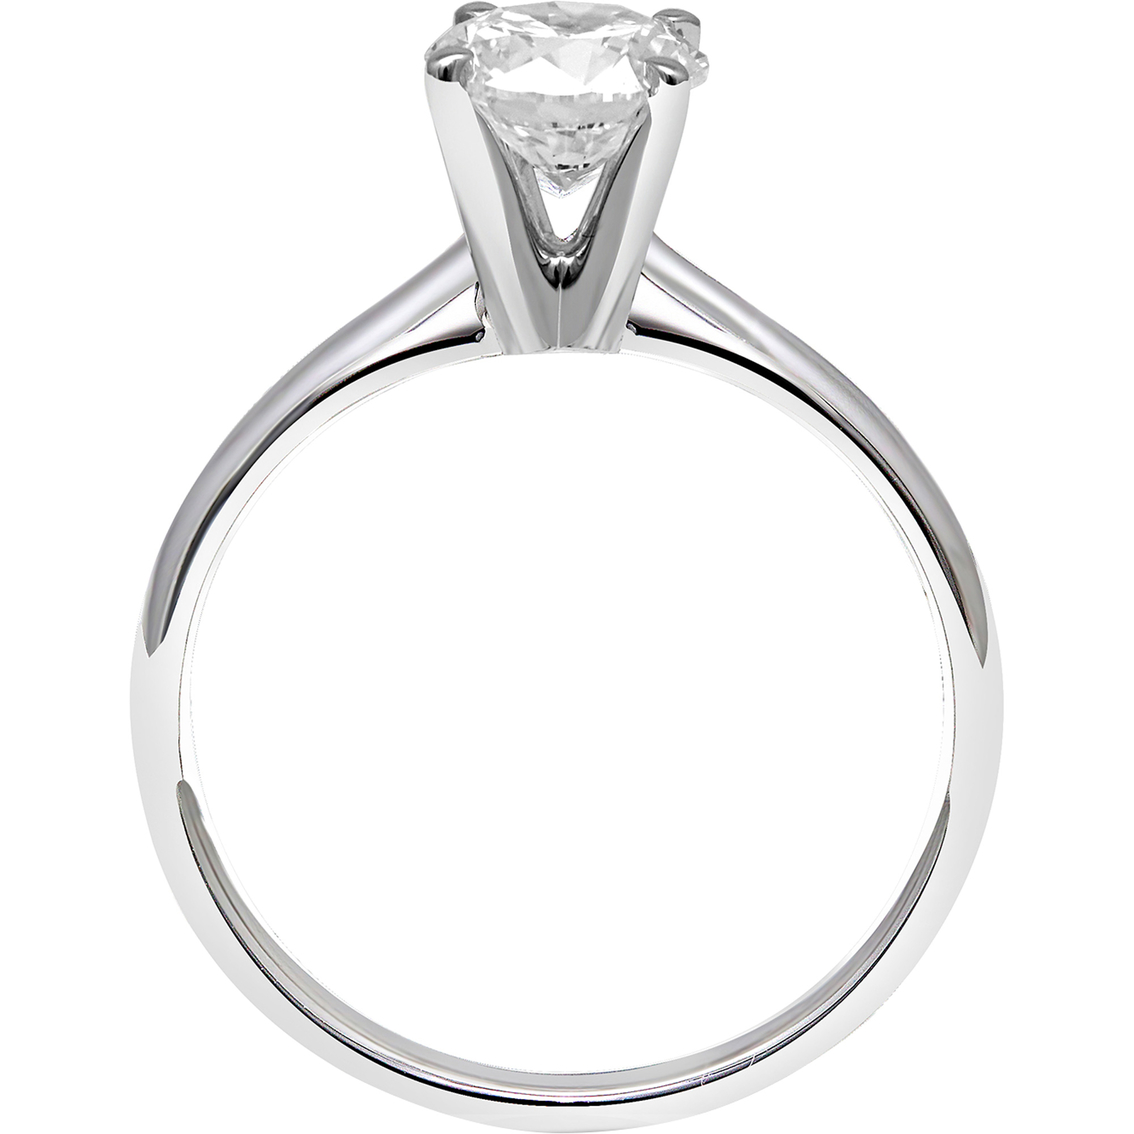 Ray of Brilliance 14K White Gold 1 ct. Lab Grown Round Diamond Solitaire Ring - Image 4 of 4